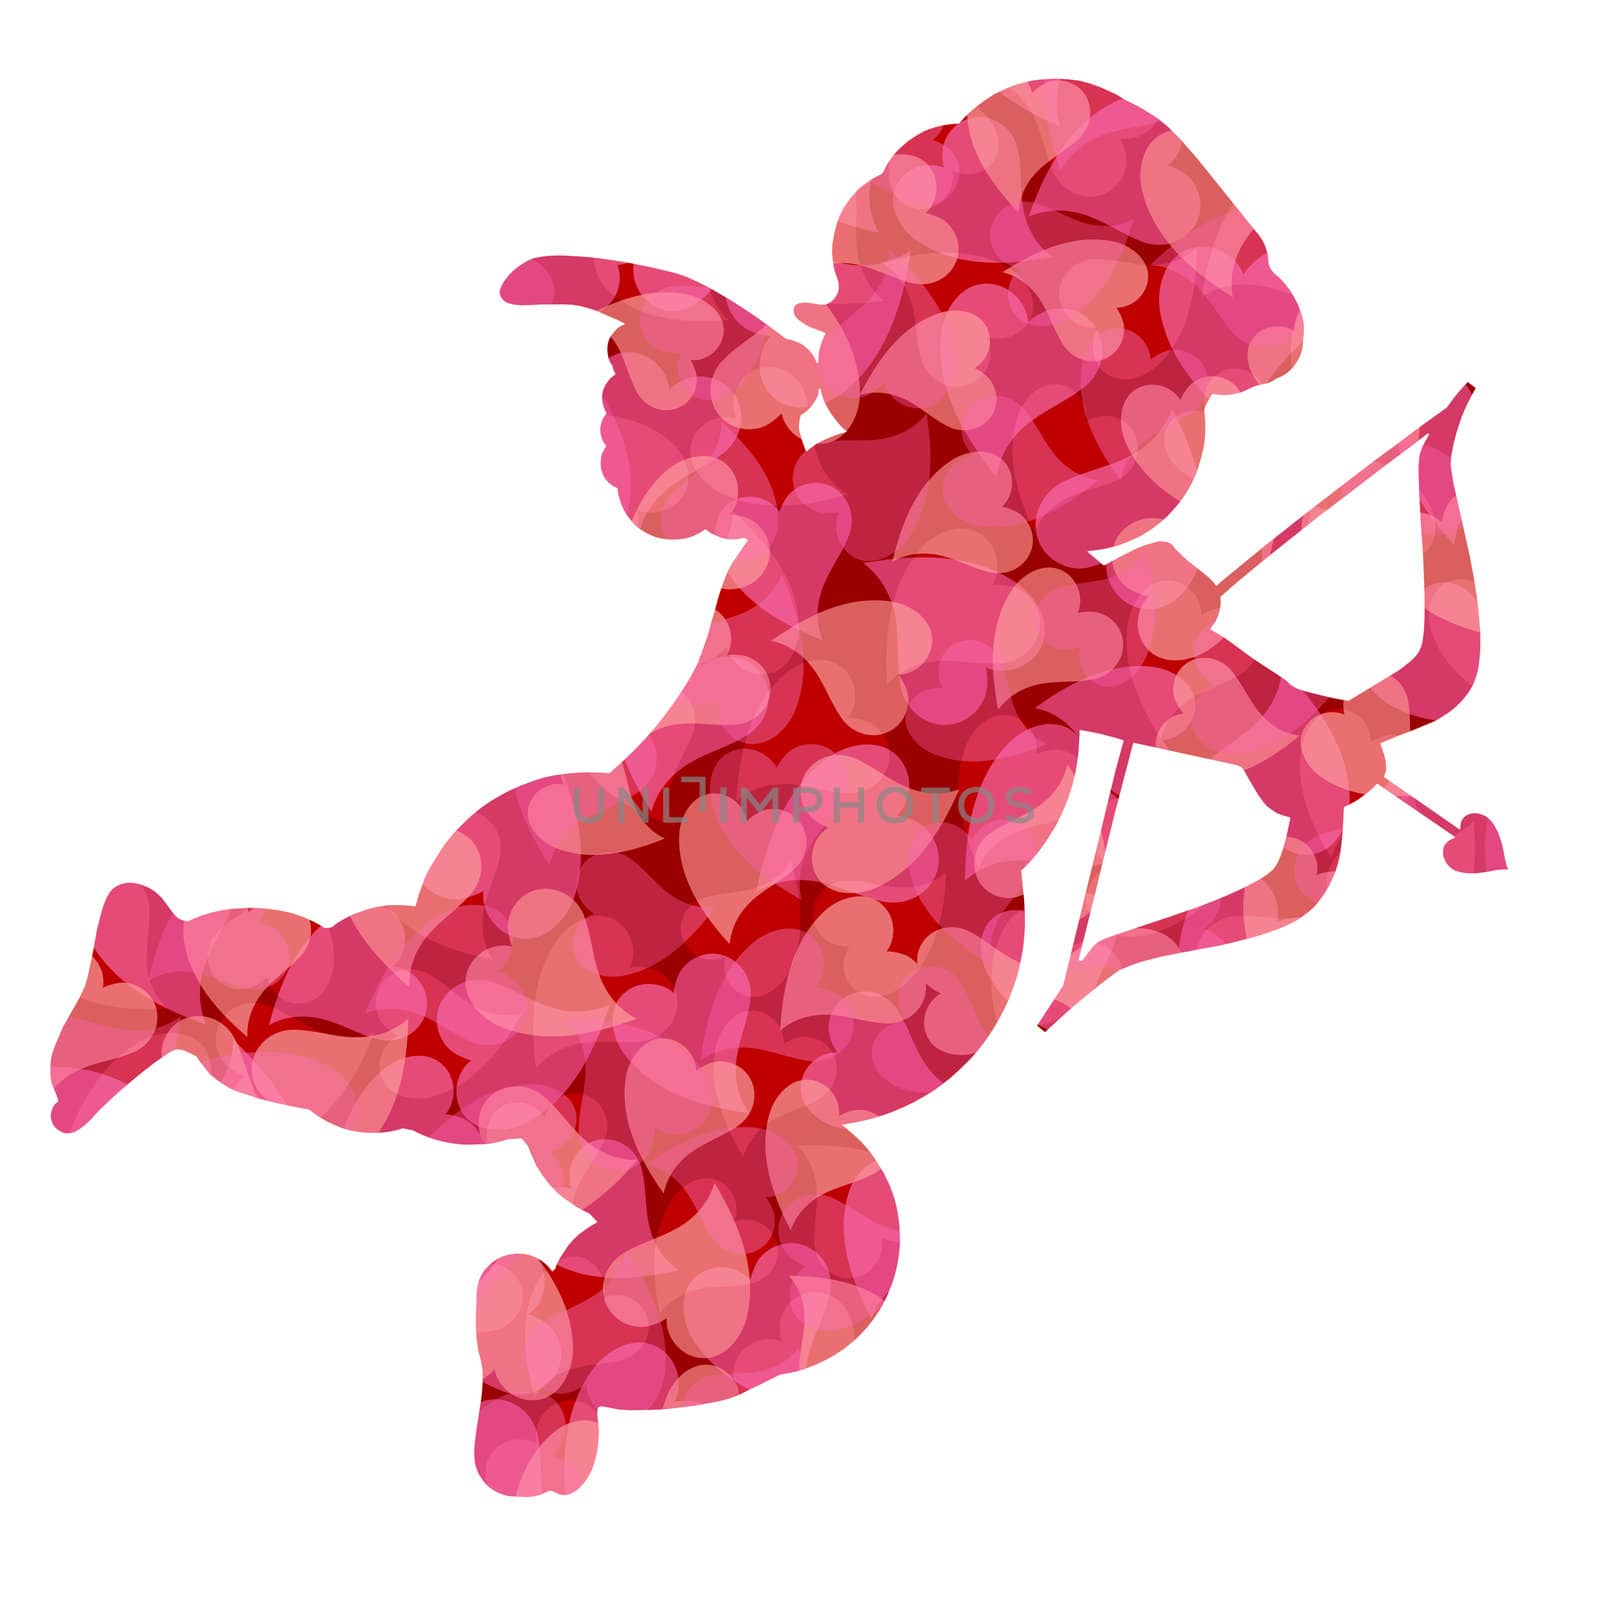 Cute Valentines Day Cupid Silhouette with Pink Pattern Hearts Illustration Isolated on White Background